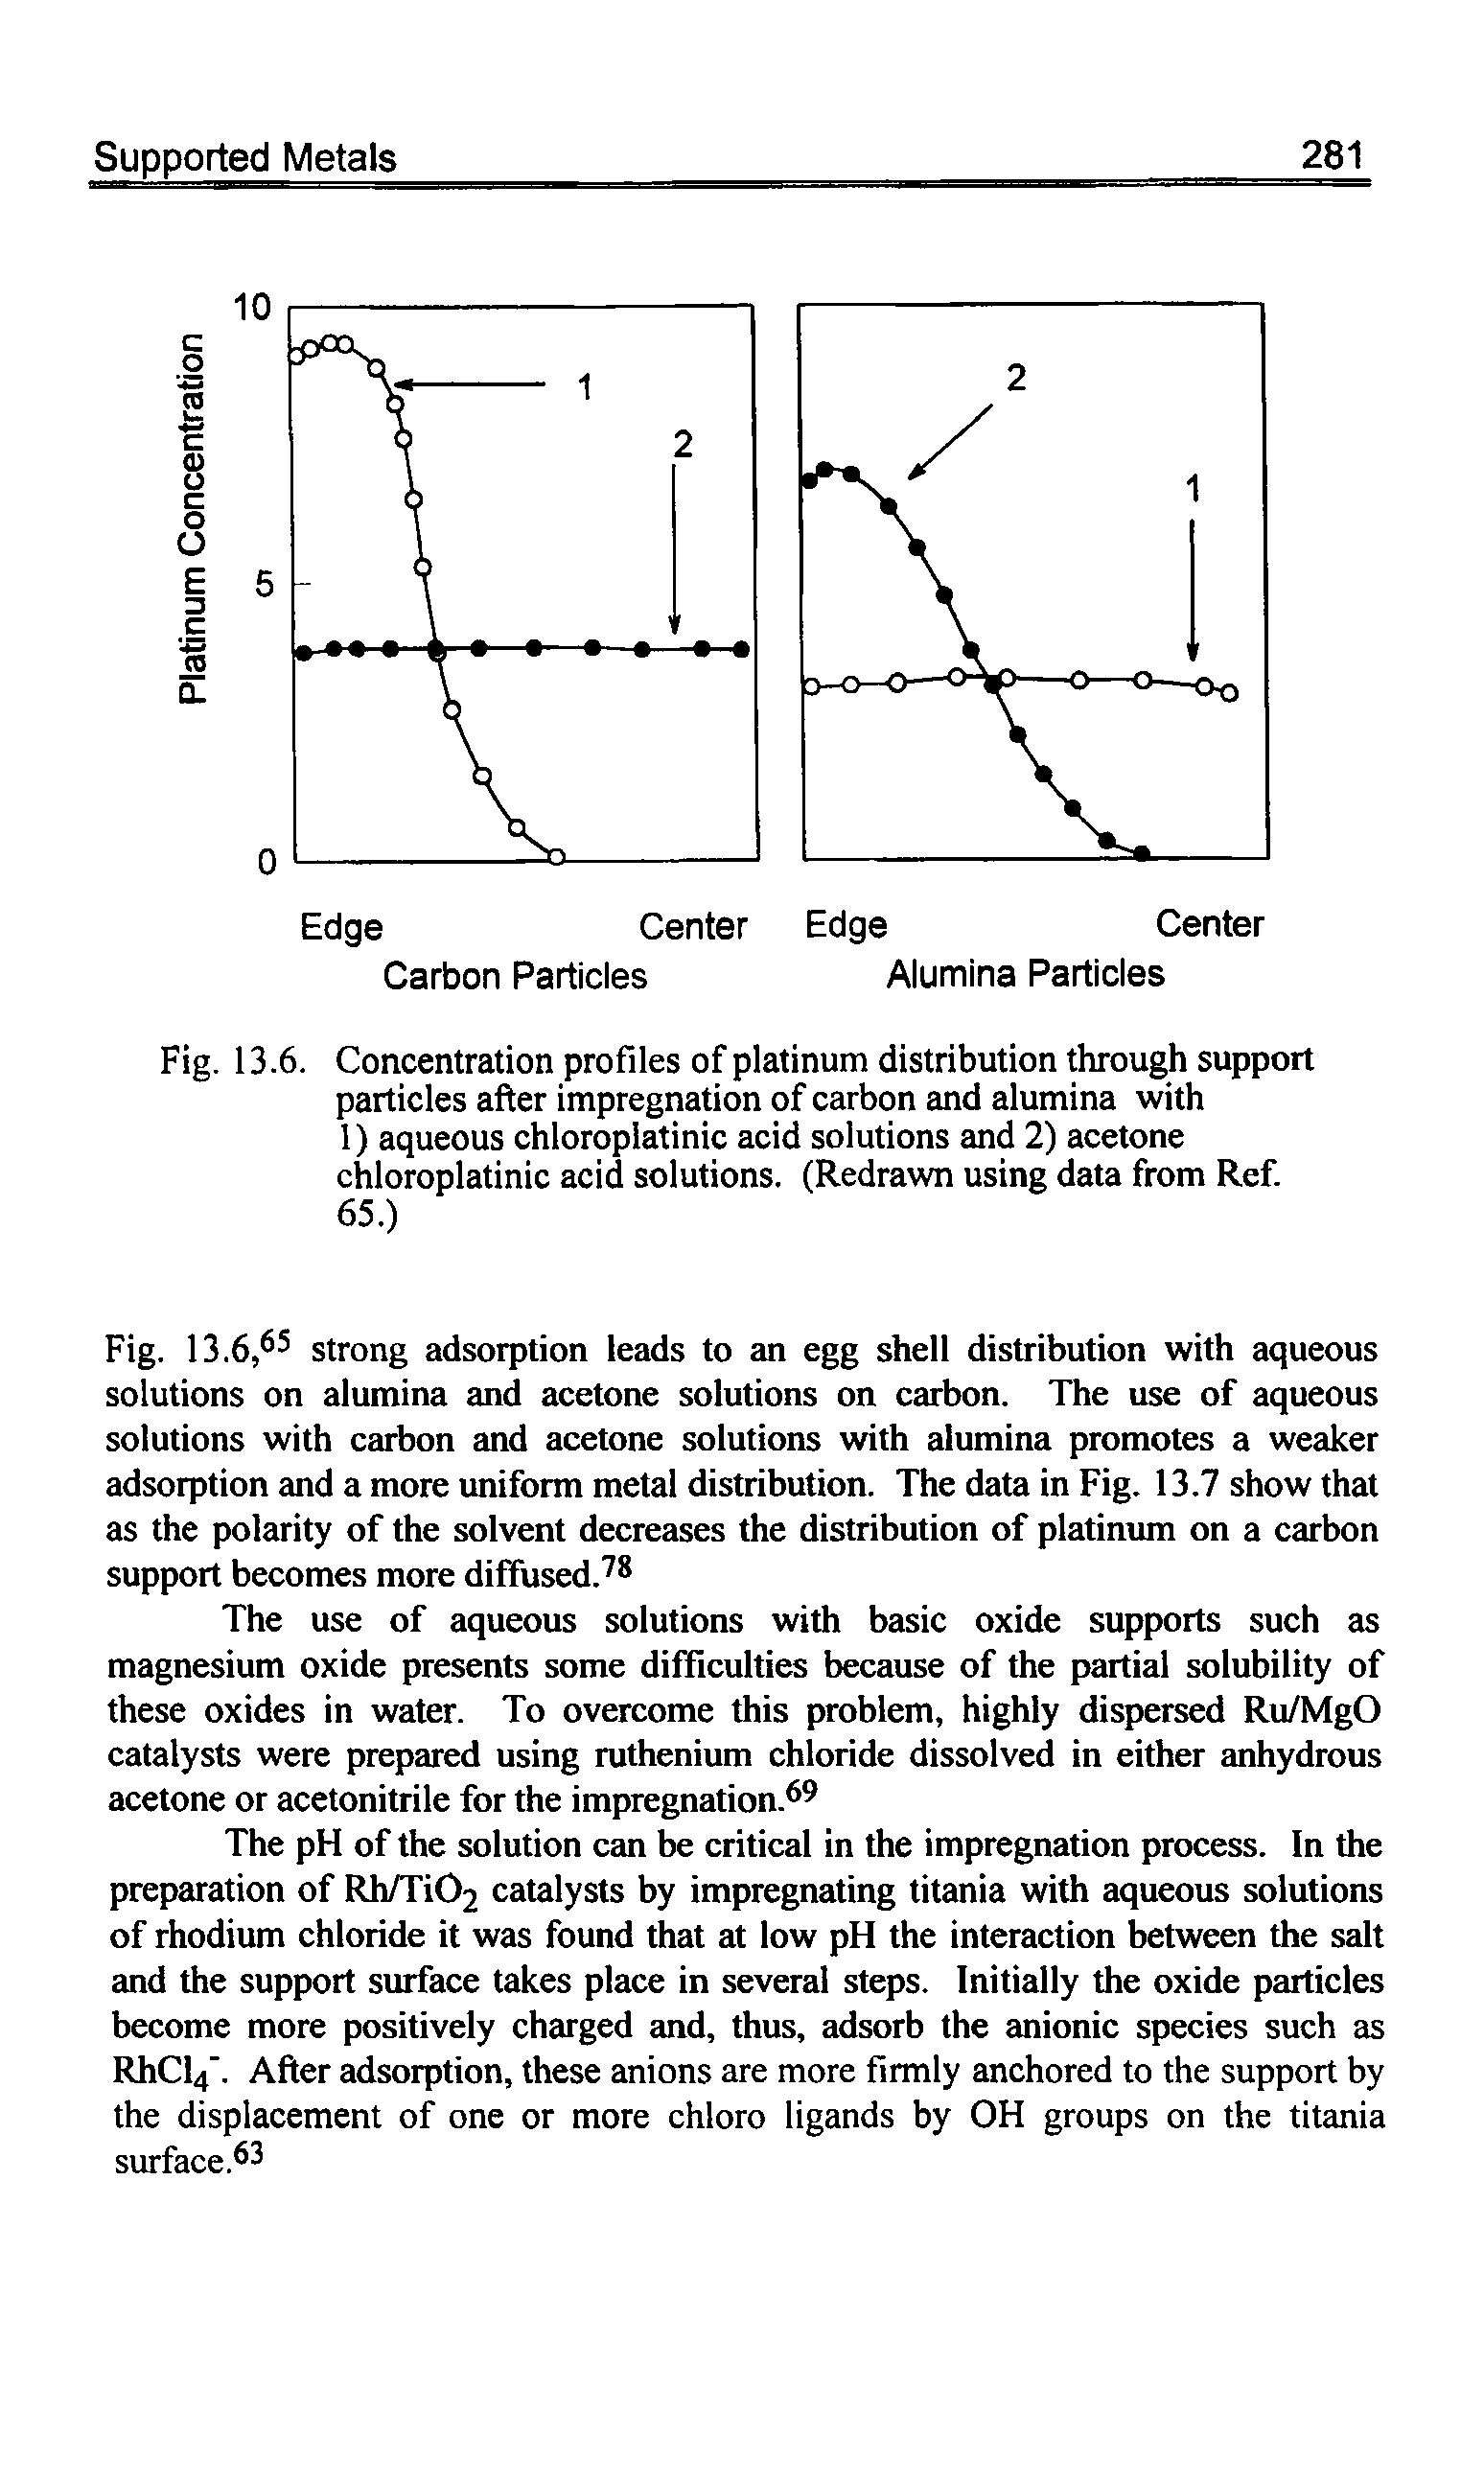 Fig. 13.6. Concentration profiles of platinum distribution through support particles after impregnation of carbon and alumina with 1) aqueous chloroplatinic acid solutions and 2) acetone chloroplatinic acid solutions. (Redrawn using data from Ref. 65.)...